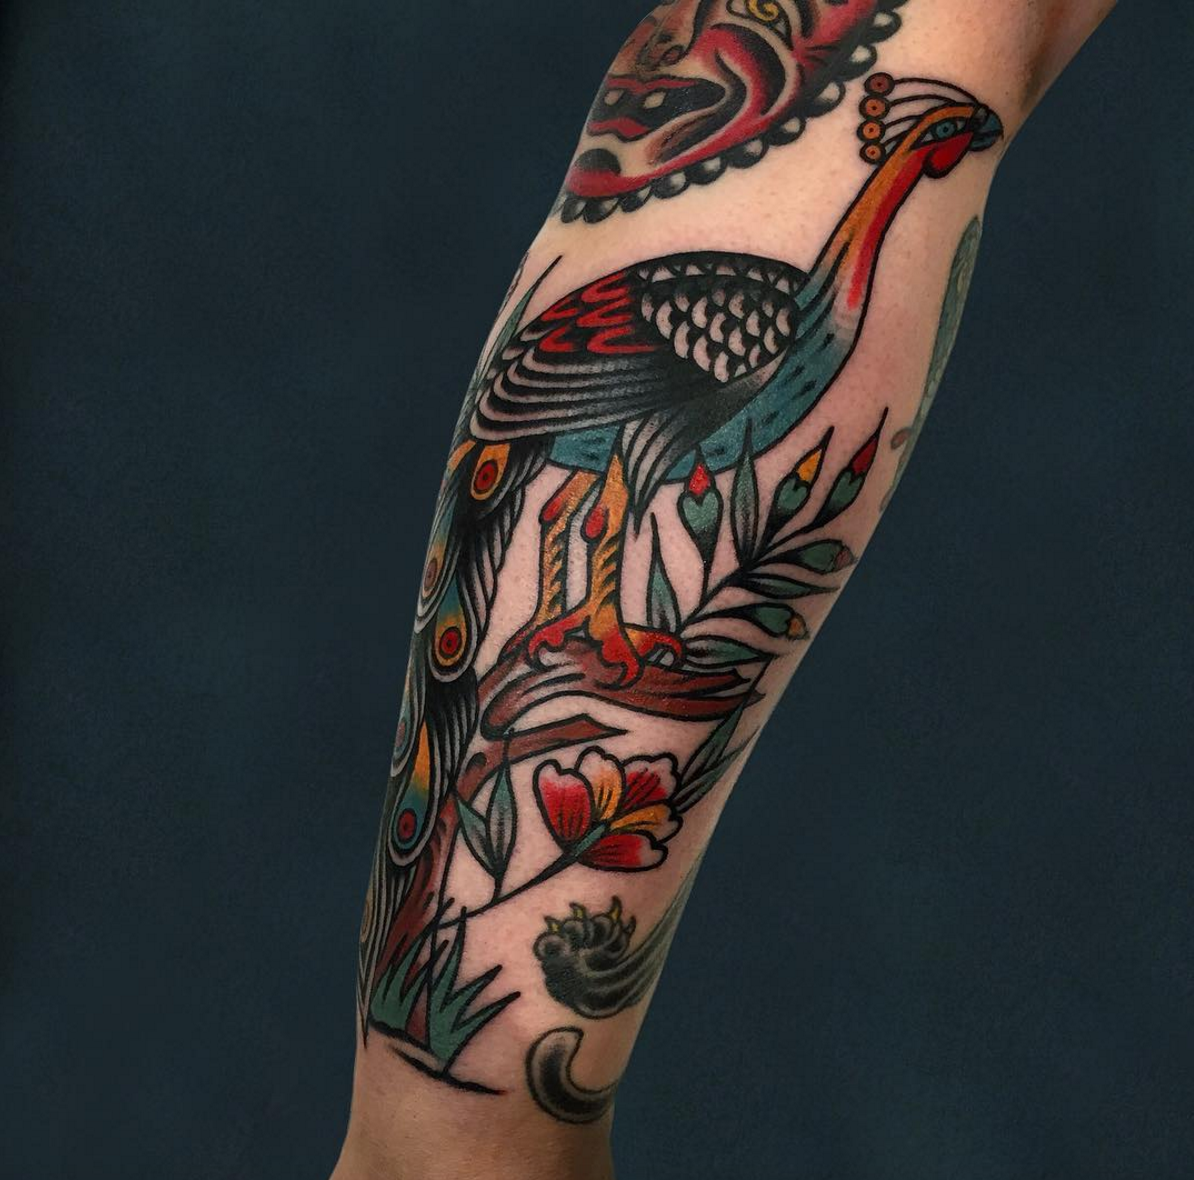 Peacock by Luke Jinks done at Cloak and Dagger Tattoo